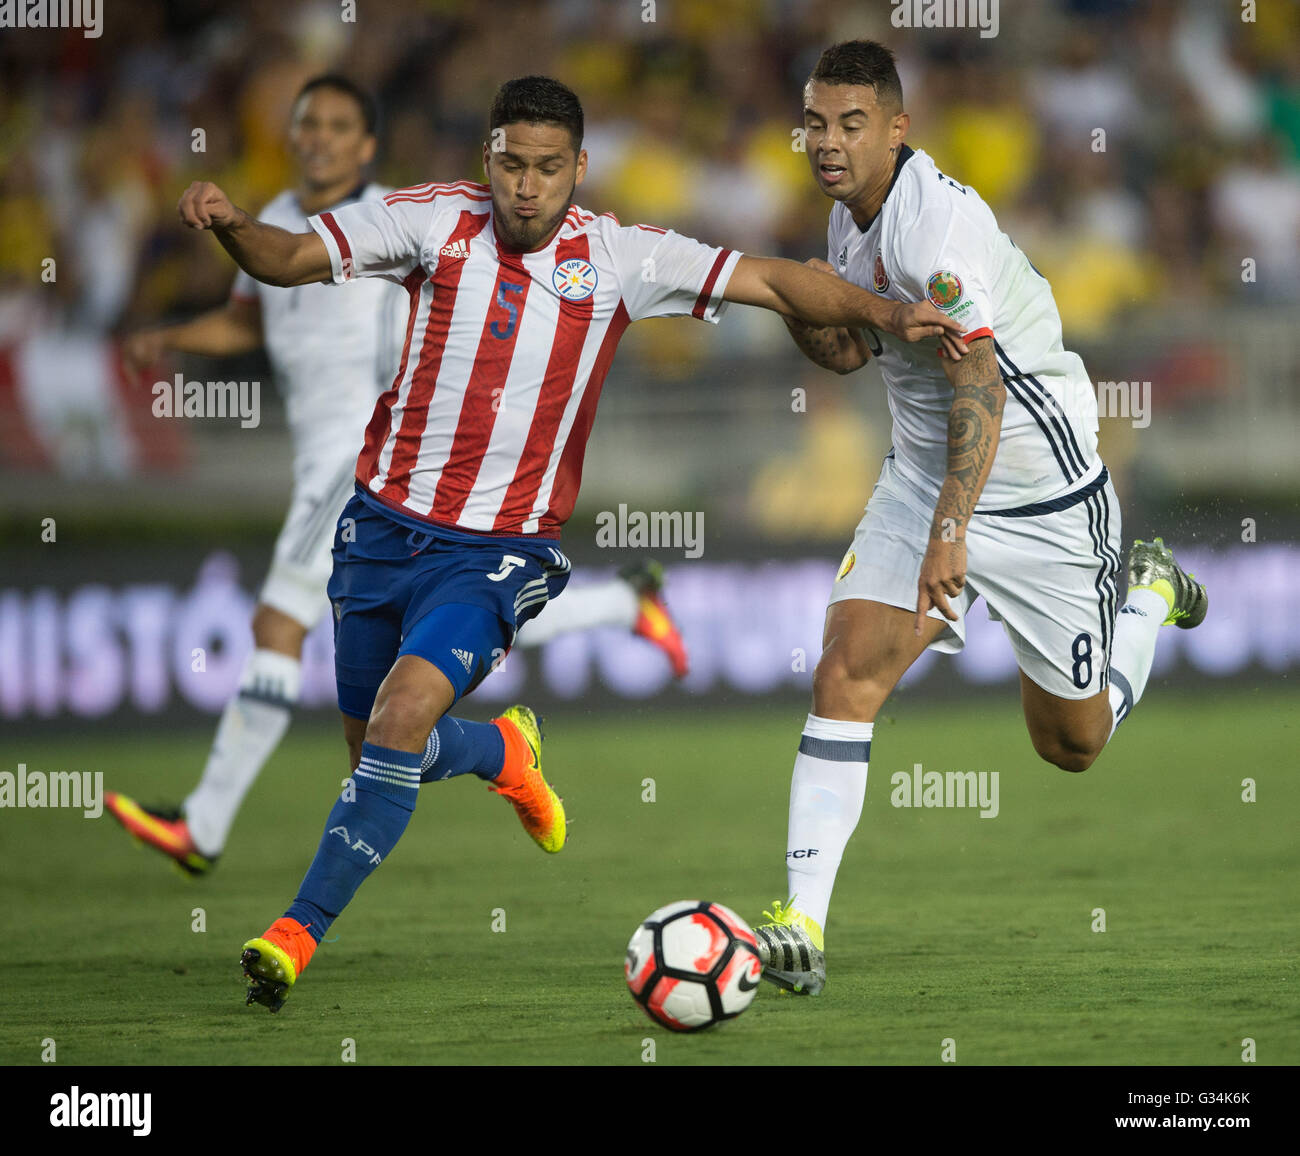 Pasadena, USA. 7th June, 2016. Paraguay's Bruno Valdez (L) vies with Colombia's Edwin Cardona during the Copa America Centenario Group A match at Rose Bowl Stadium in Pasadena, California, the United States, June 7, 2016. © Yang Lei/Xinhua/Alamy Live News Stock Photo